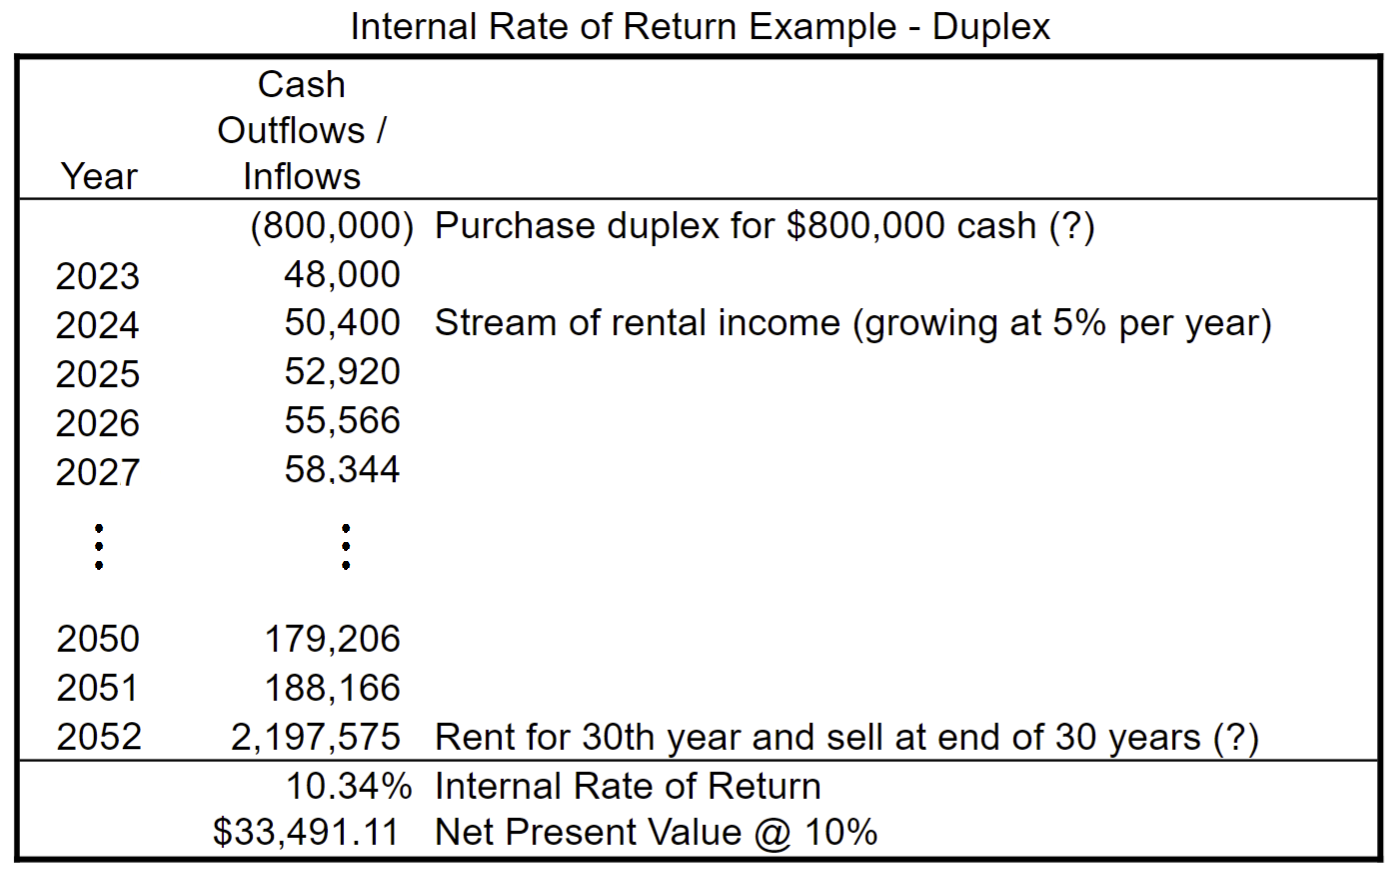 This spreadsheet calculates the Internal Rate of Return and Net Present Value of a real estate investment.